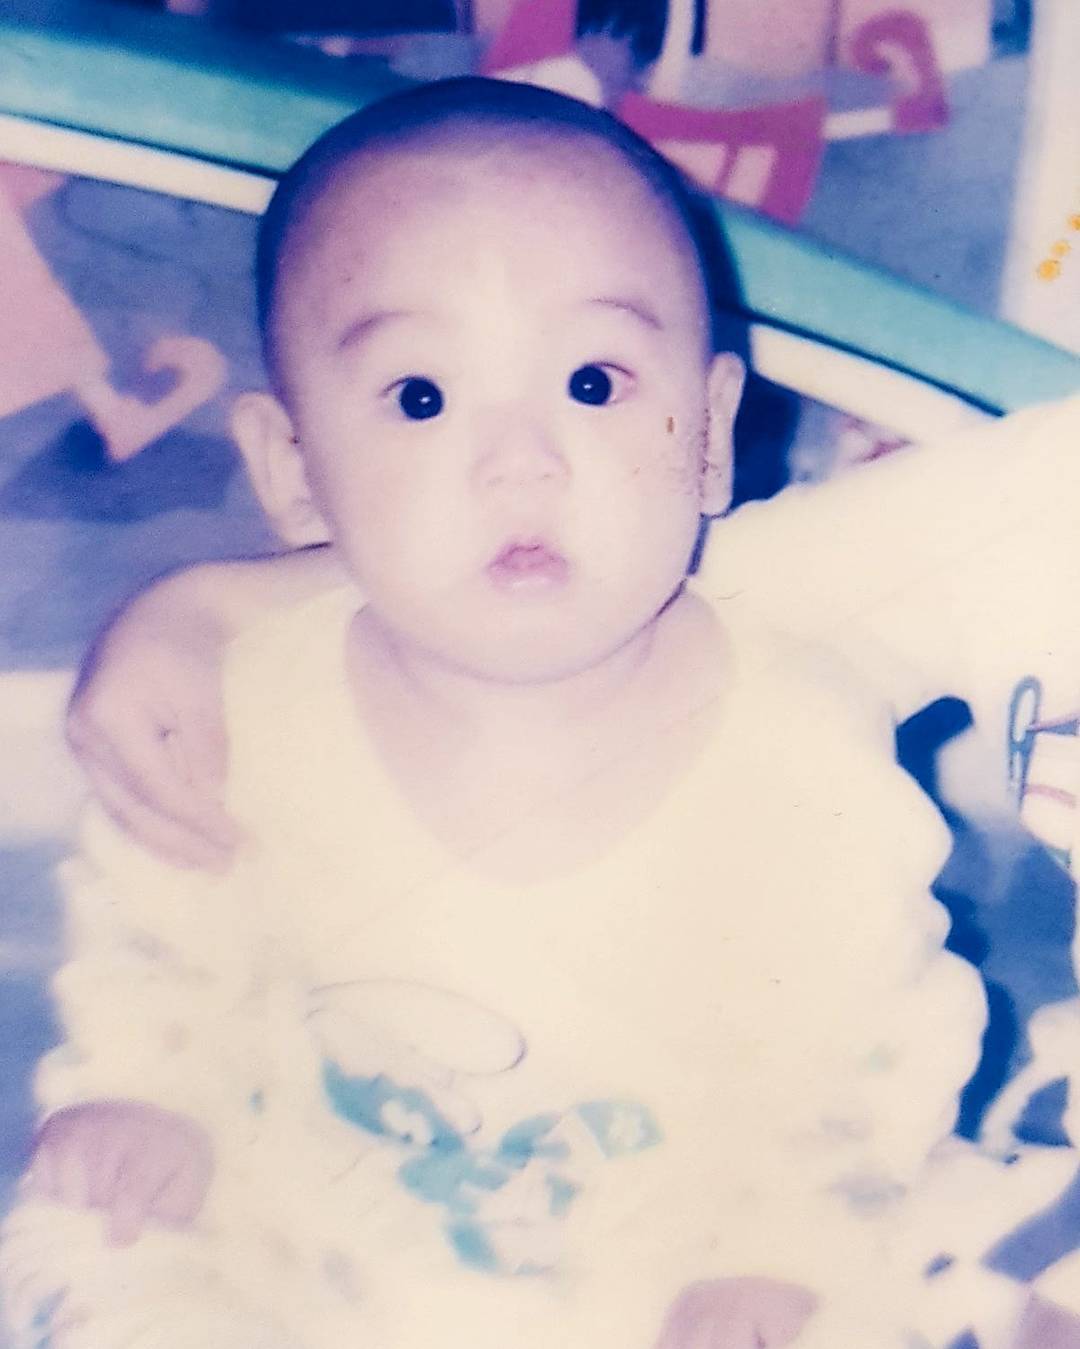 BTS Jungkook’s Supercute Childhood Pictures That Will Make Fans Go ‘aww’ 2